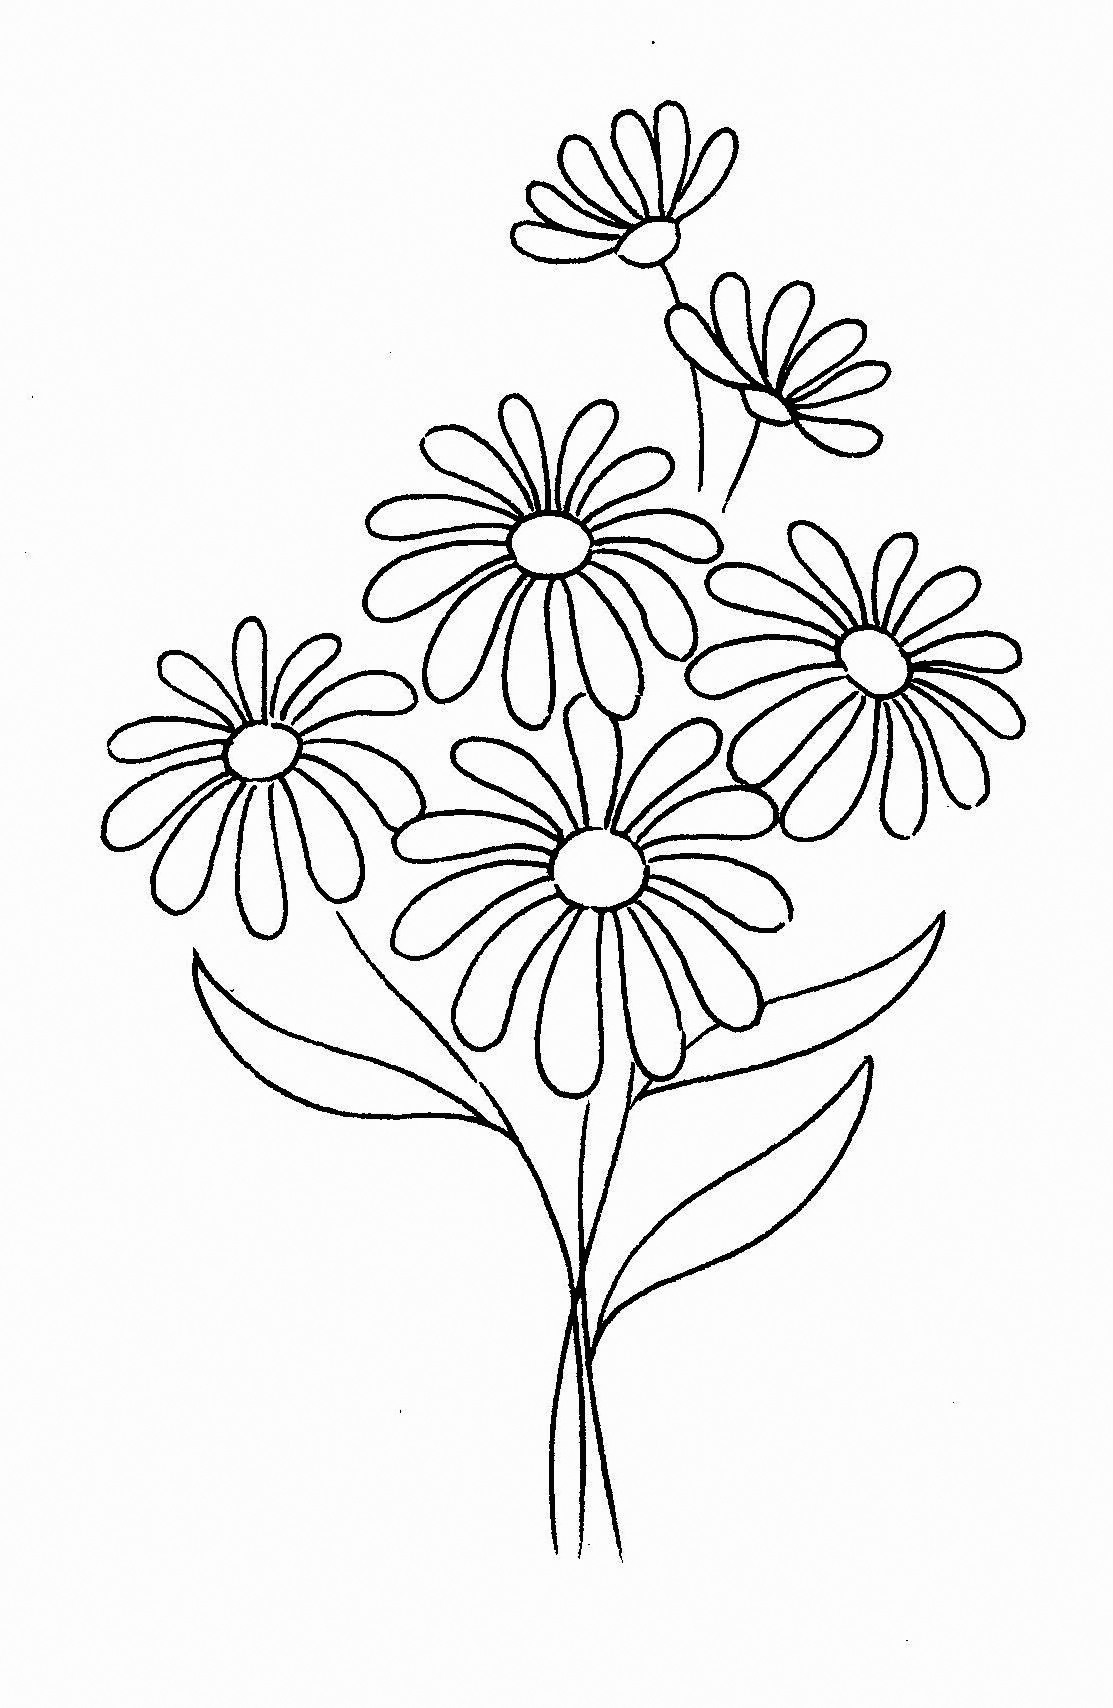 bursting-blossoms-flower-coloring-page-spring-coloring-pages